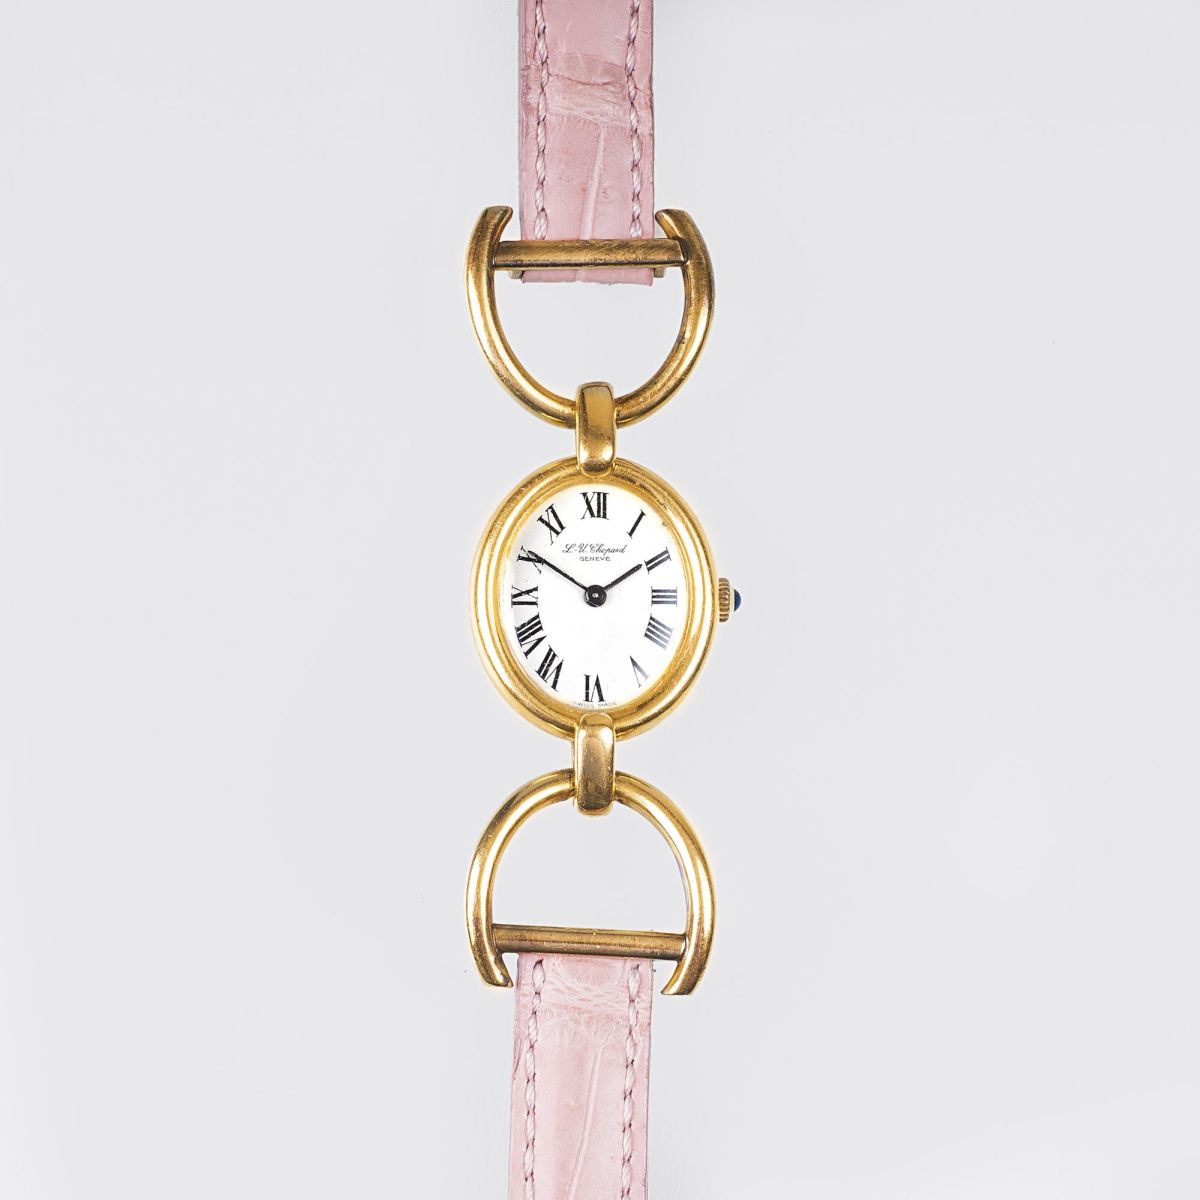 A Ladies' Watch